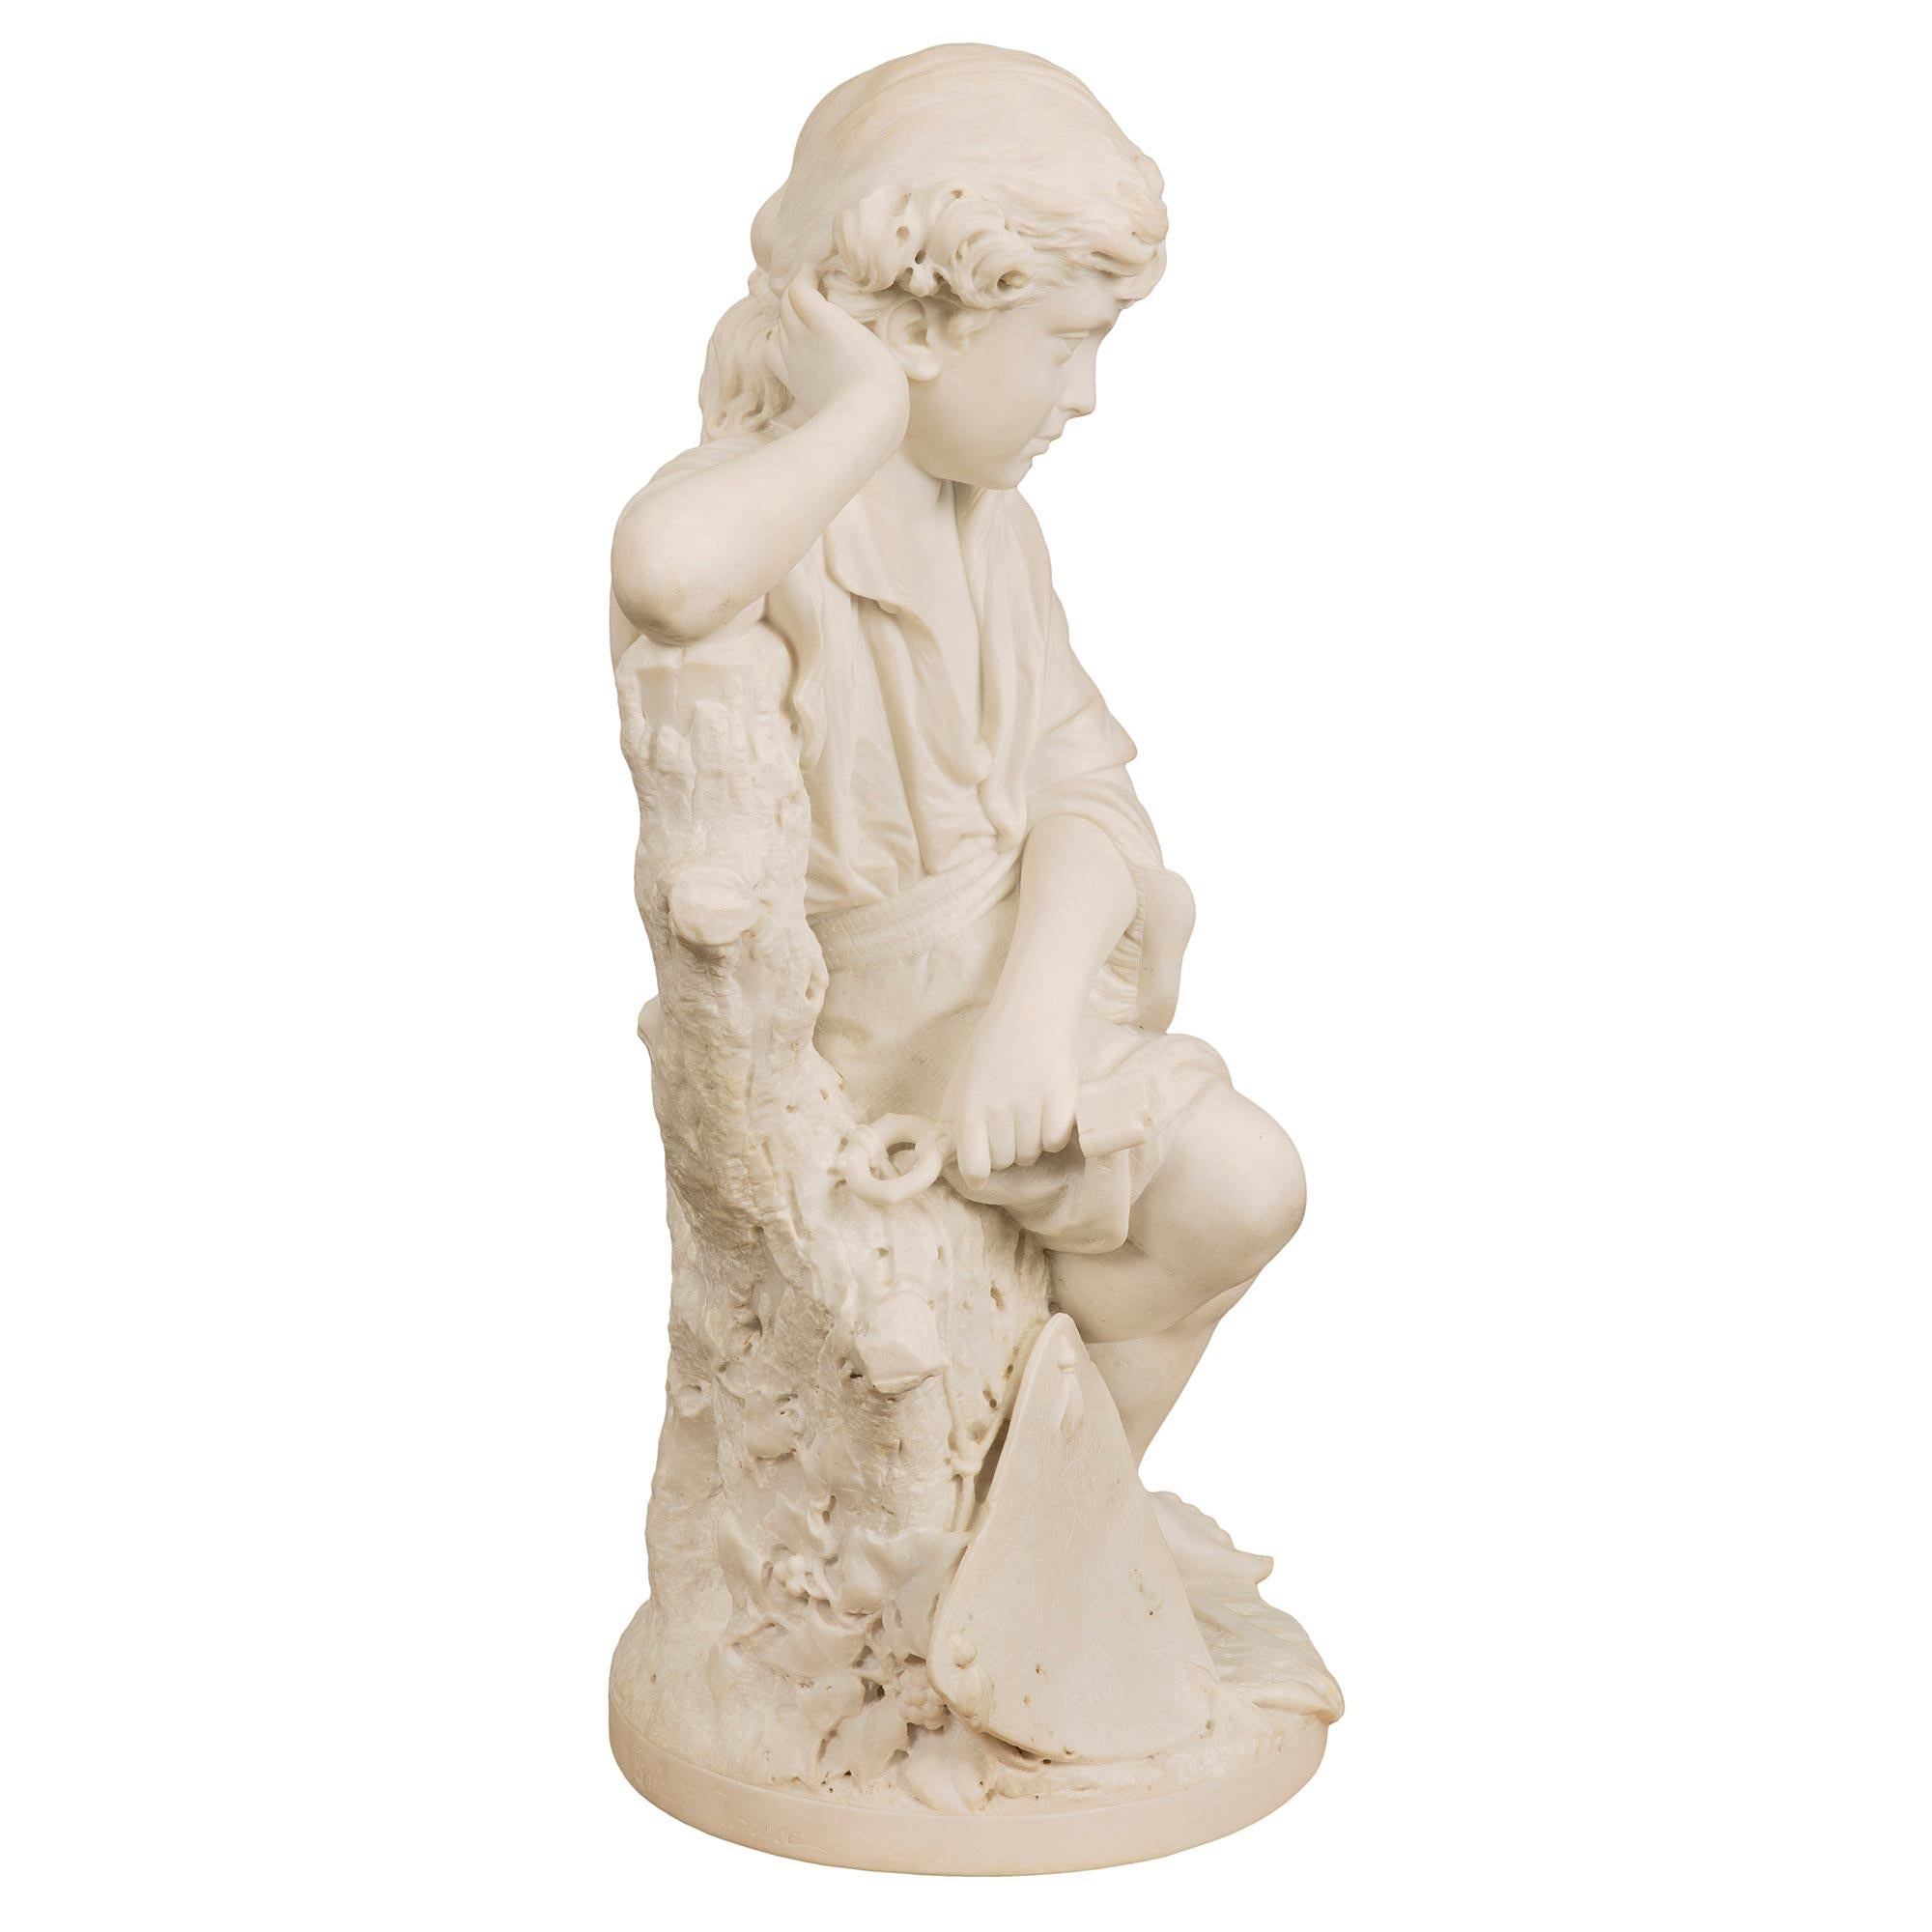 A very high quality Italian 19th century white Carrara marble statue of a young Benjamin Franklin, with a kite tied to a key, signed P. Bazzanti, Florence. The statue is raised by a circular base where the signature is displayed. The masterfully